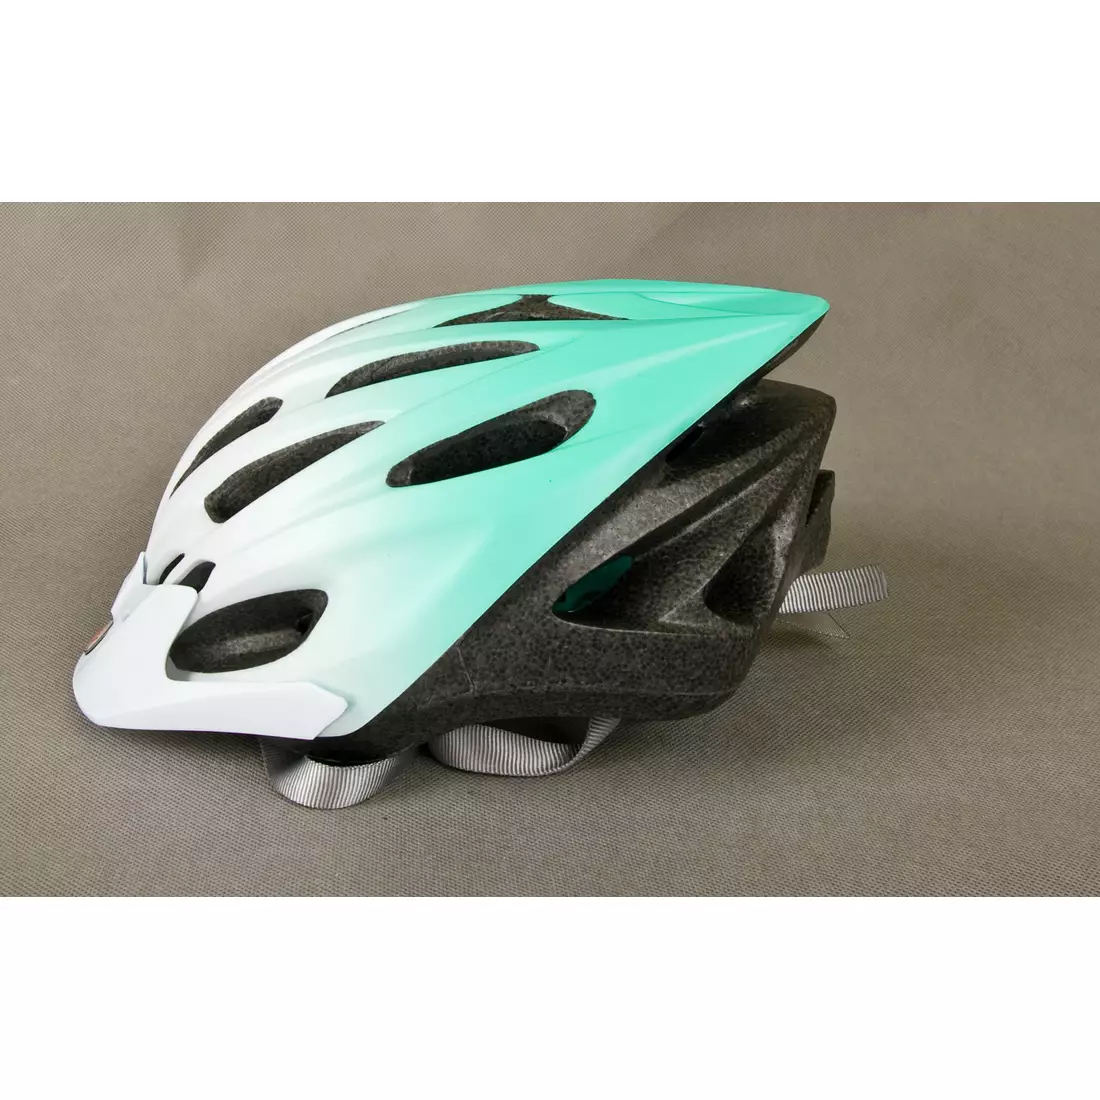 BELL SOLARA - women's bicycle helmet, white and green